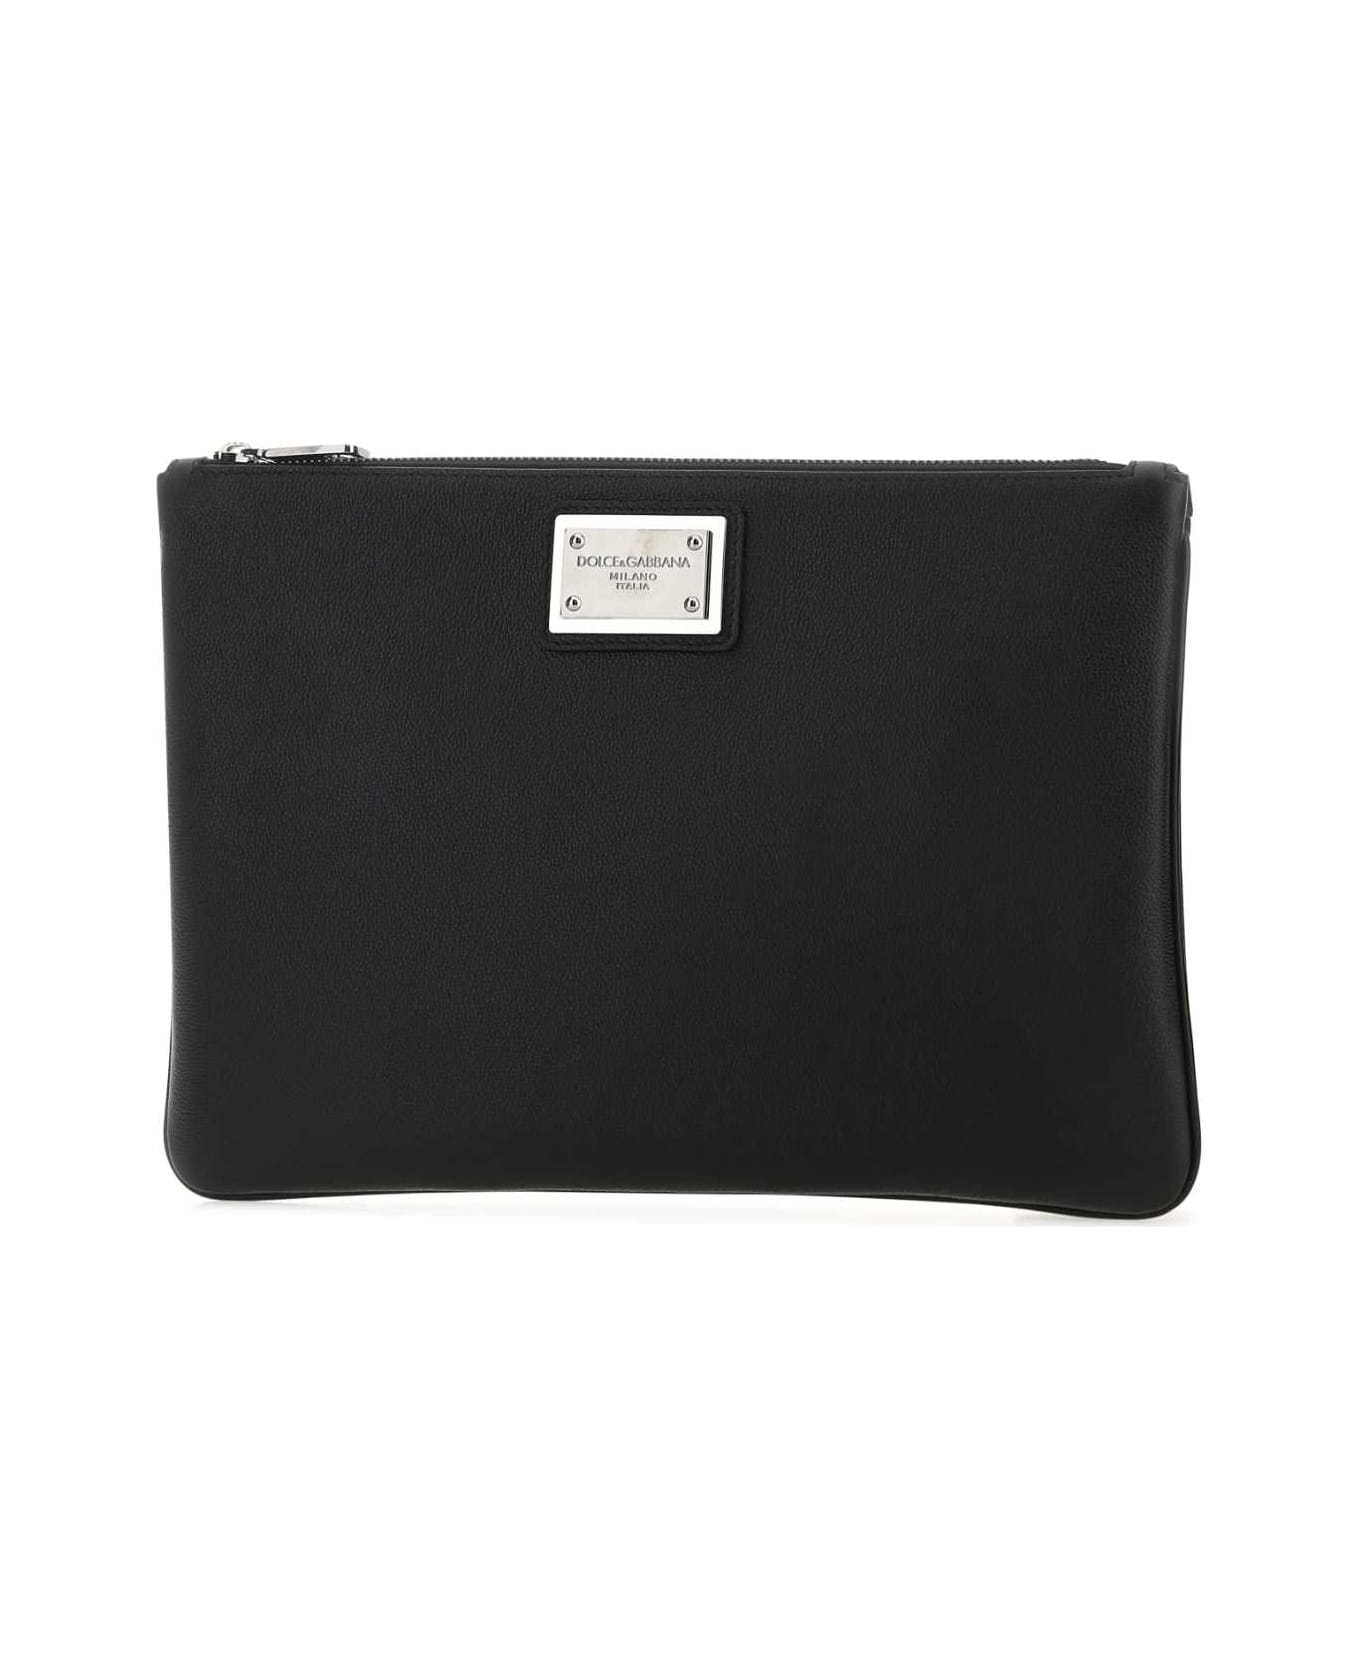 Dolce & Gabbana Black Leather And Nylon Pouch - 8B956